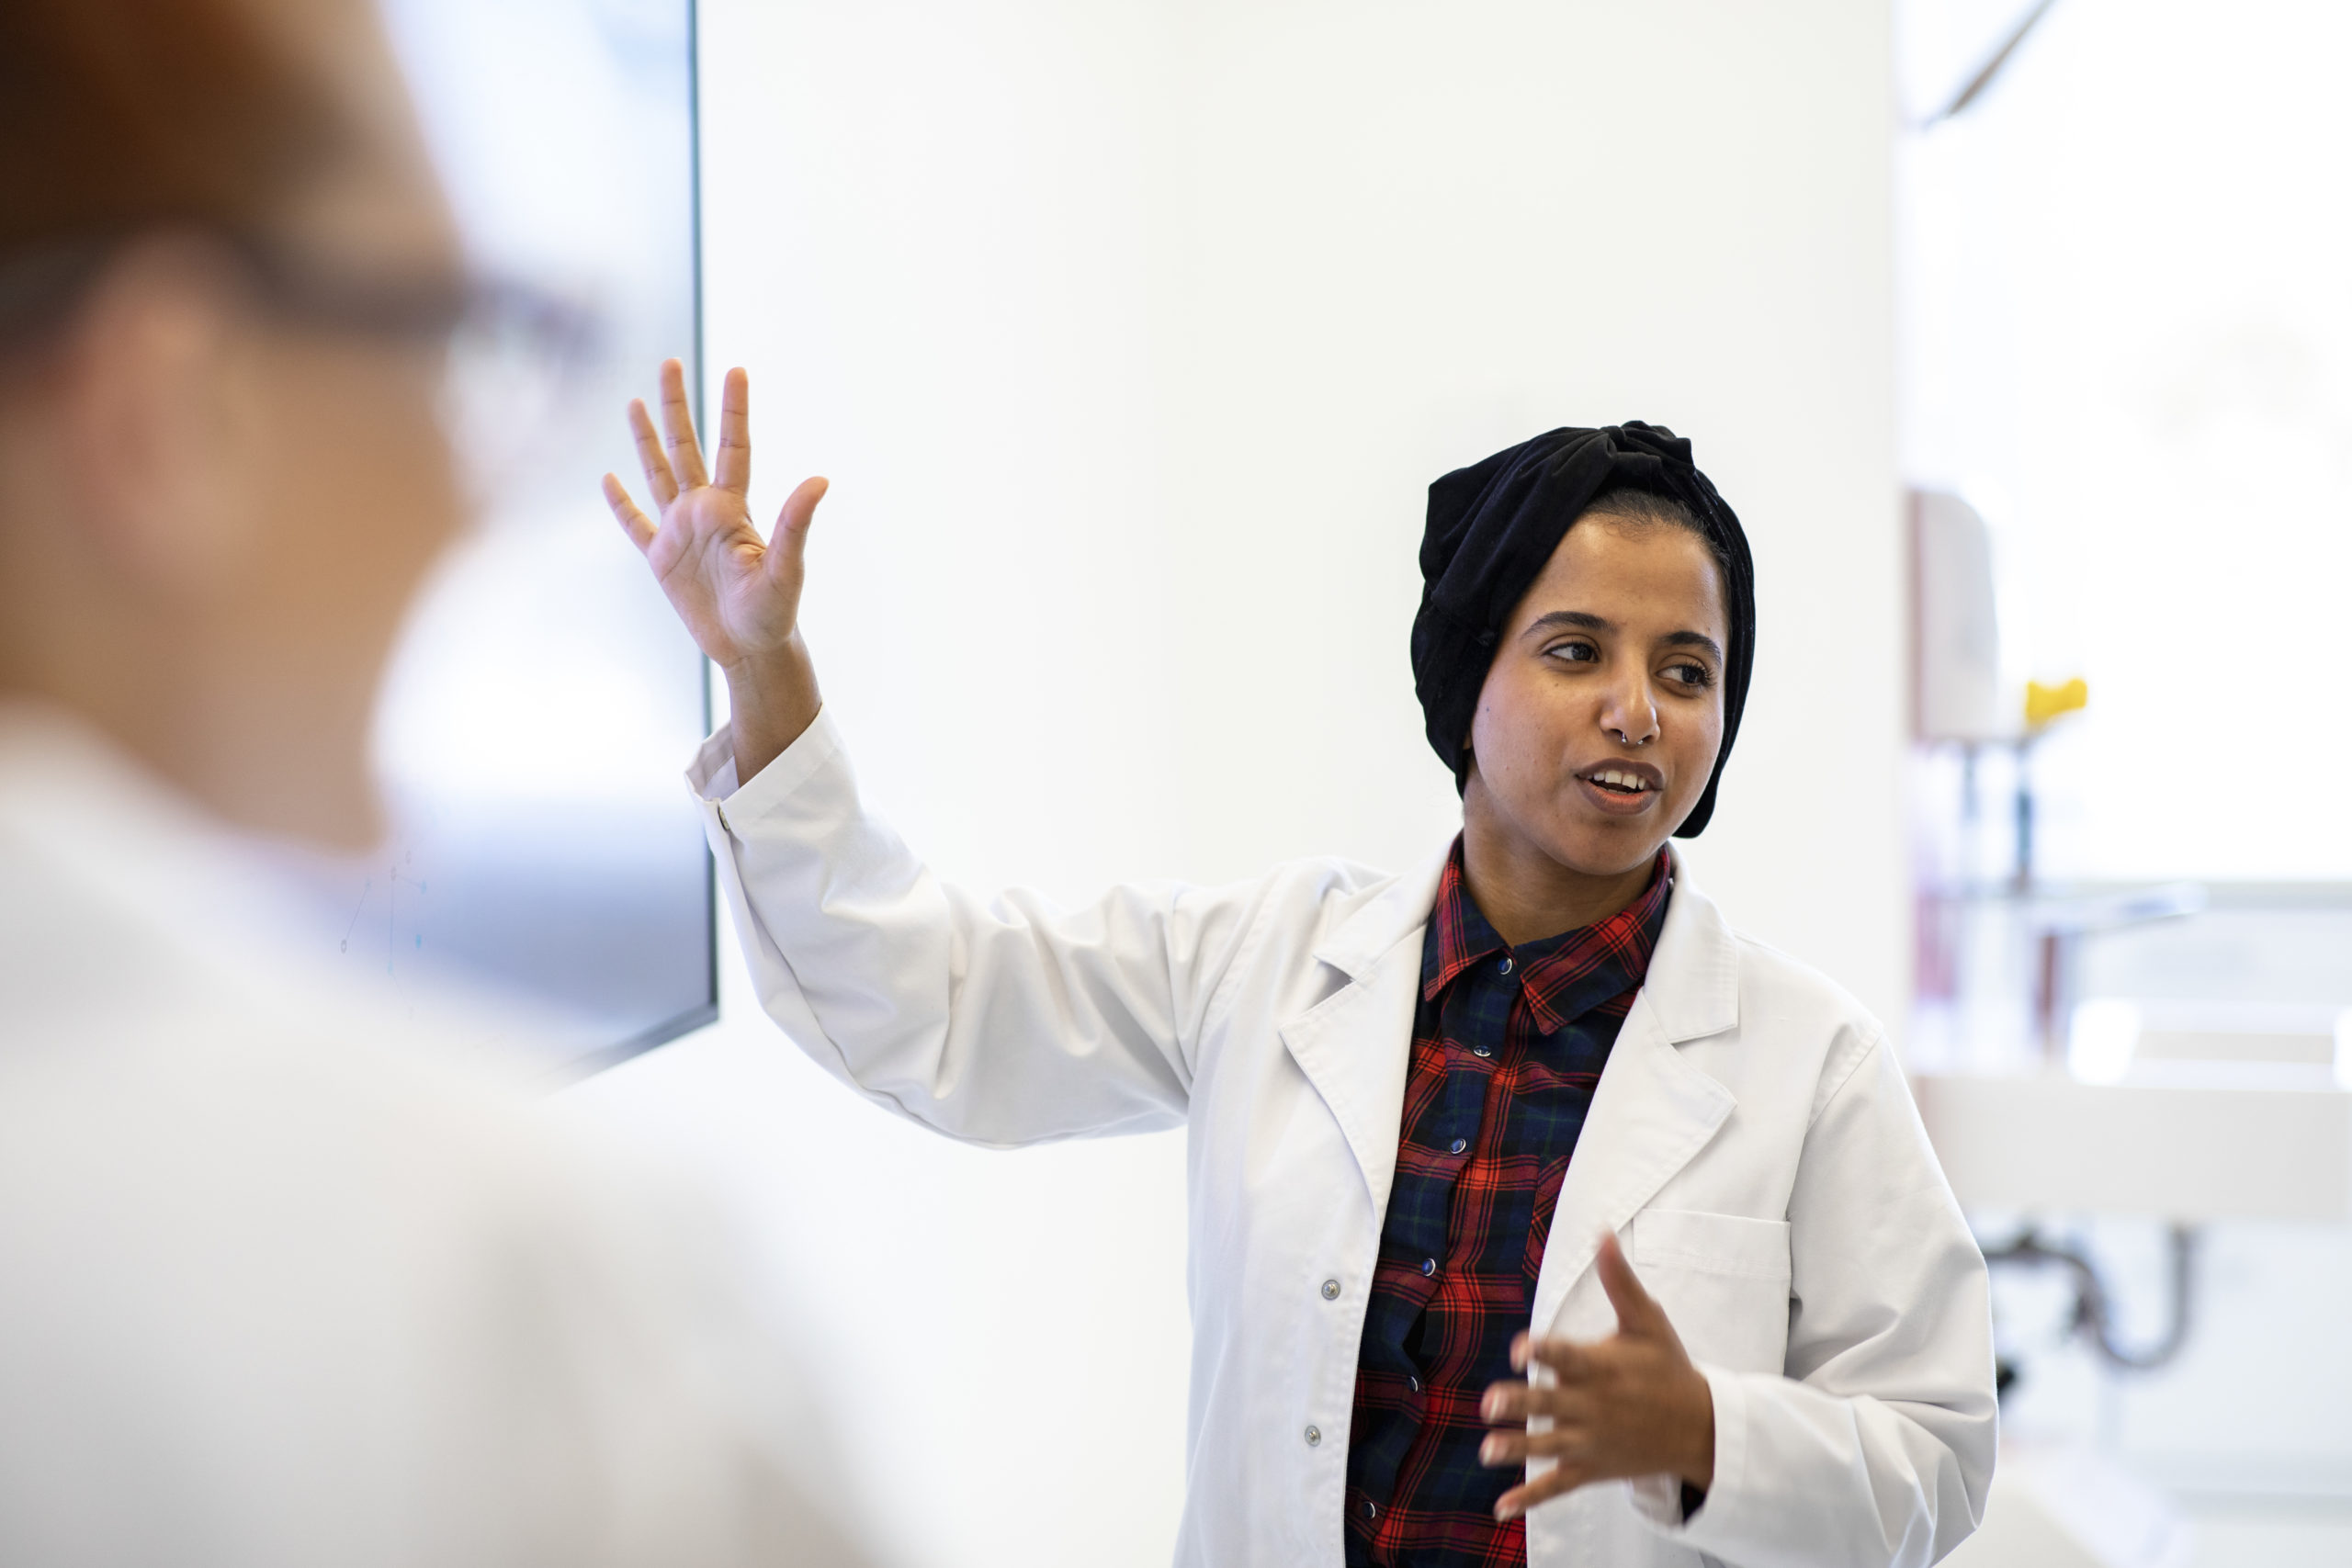 Image of young person lecturing in lab coat